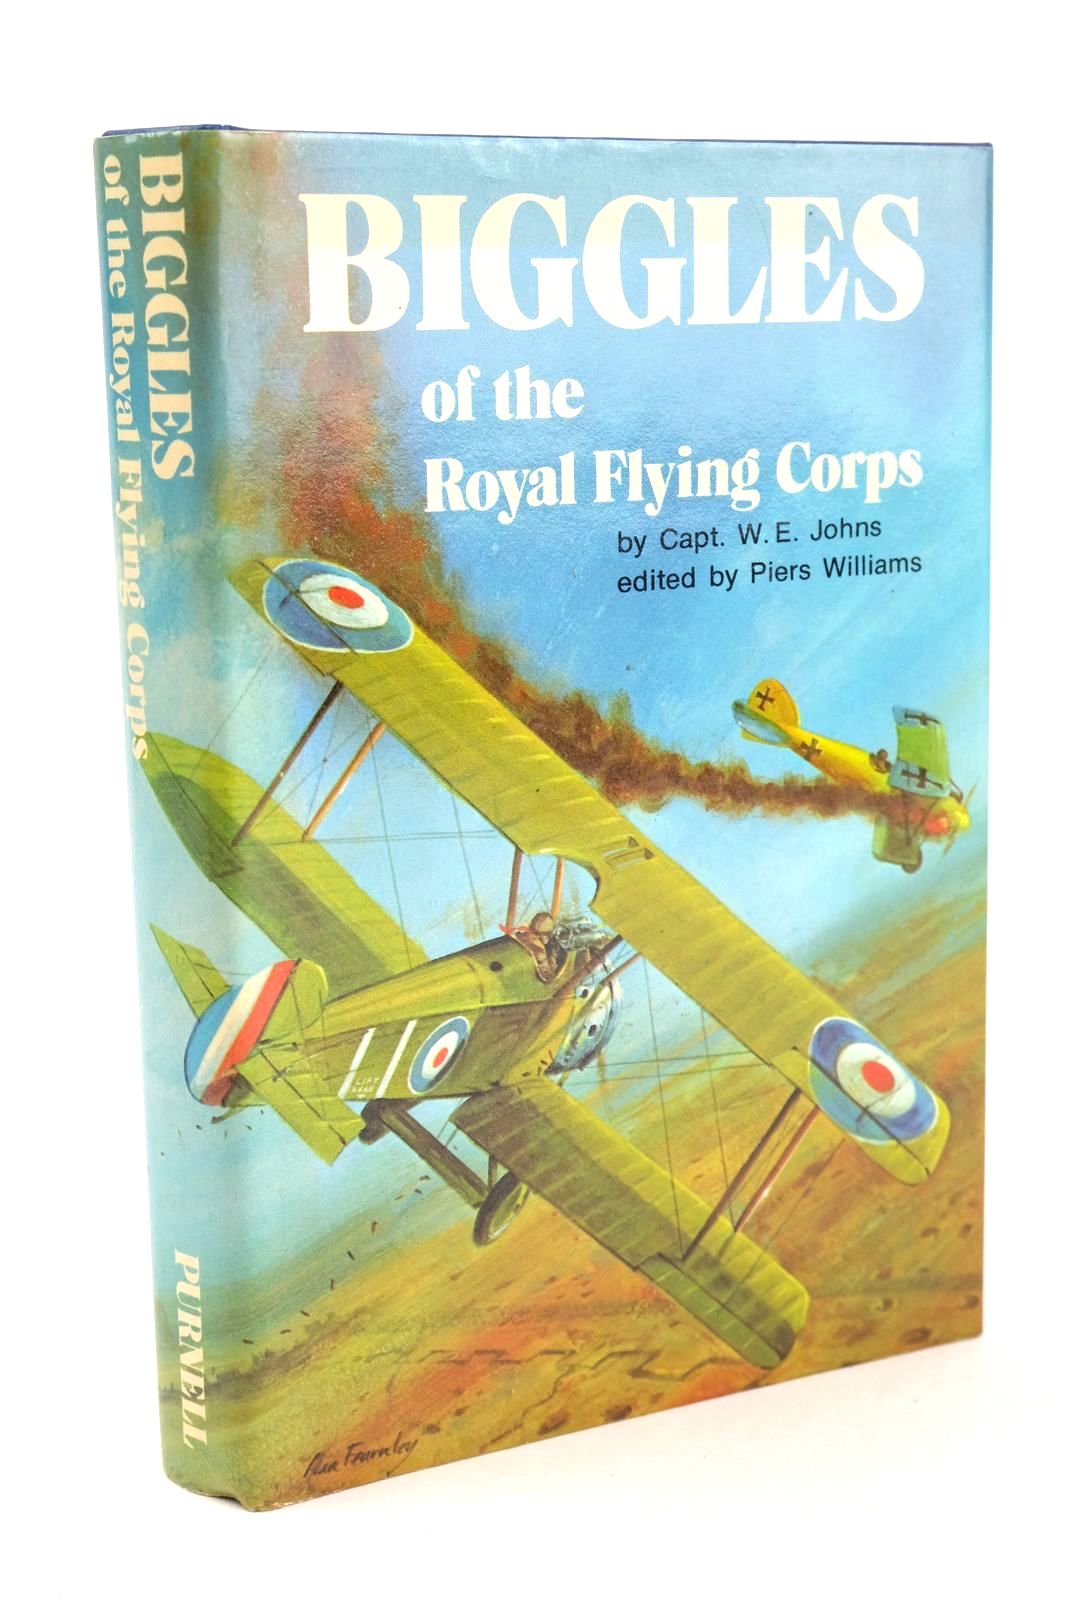 Photo of BIGGLES OF THE ROYAL FLYING CORPS- Stock Number: 1326028